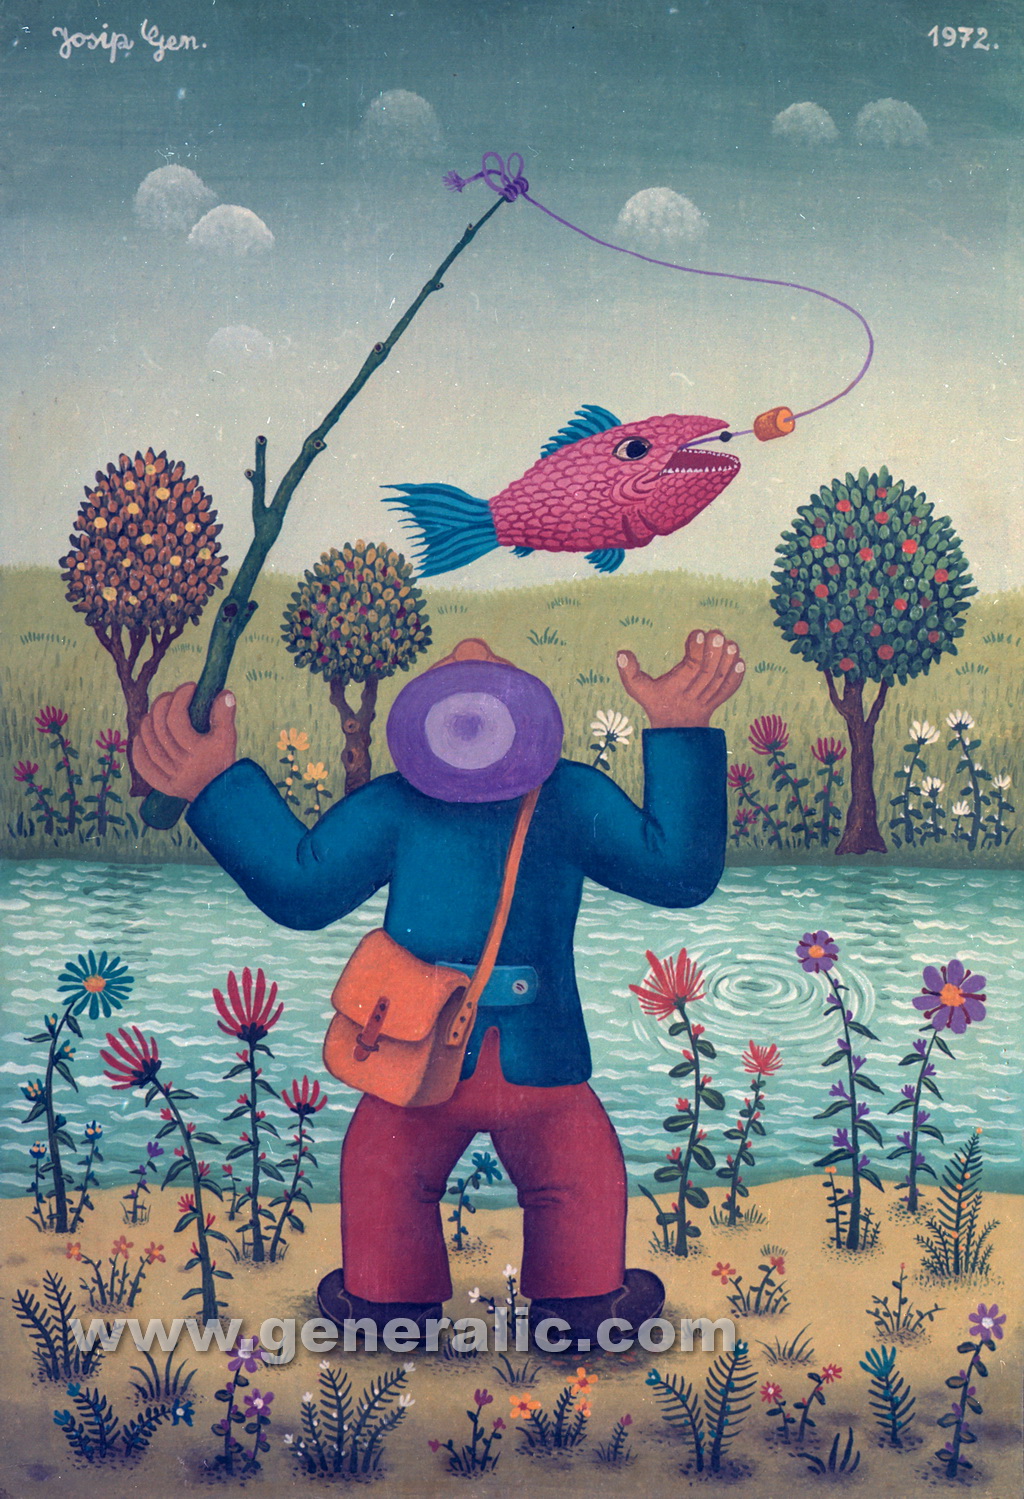 Josip Generalic, 1972, Fisherman with red fish, oil on canvas